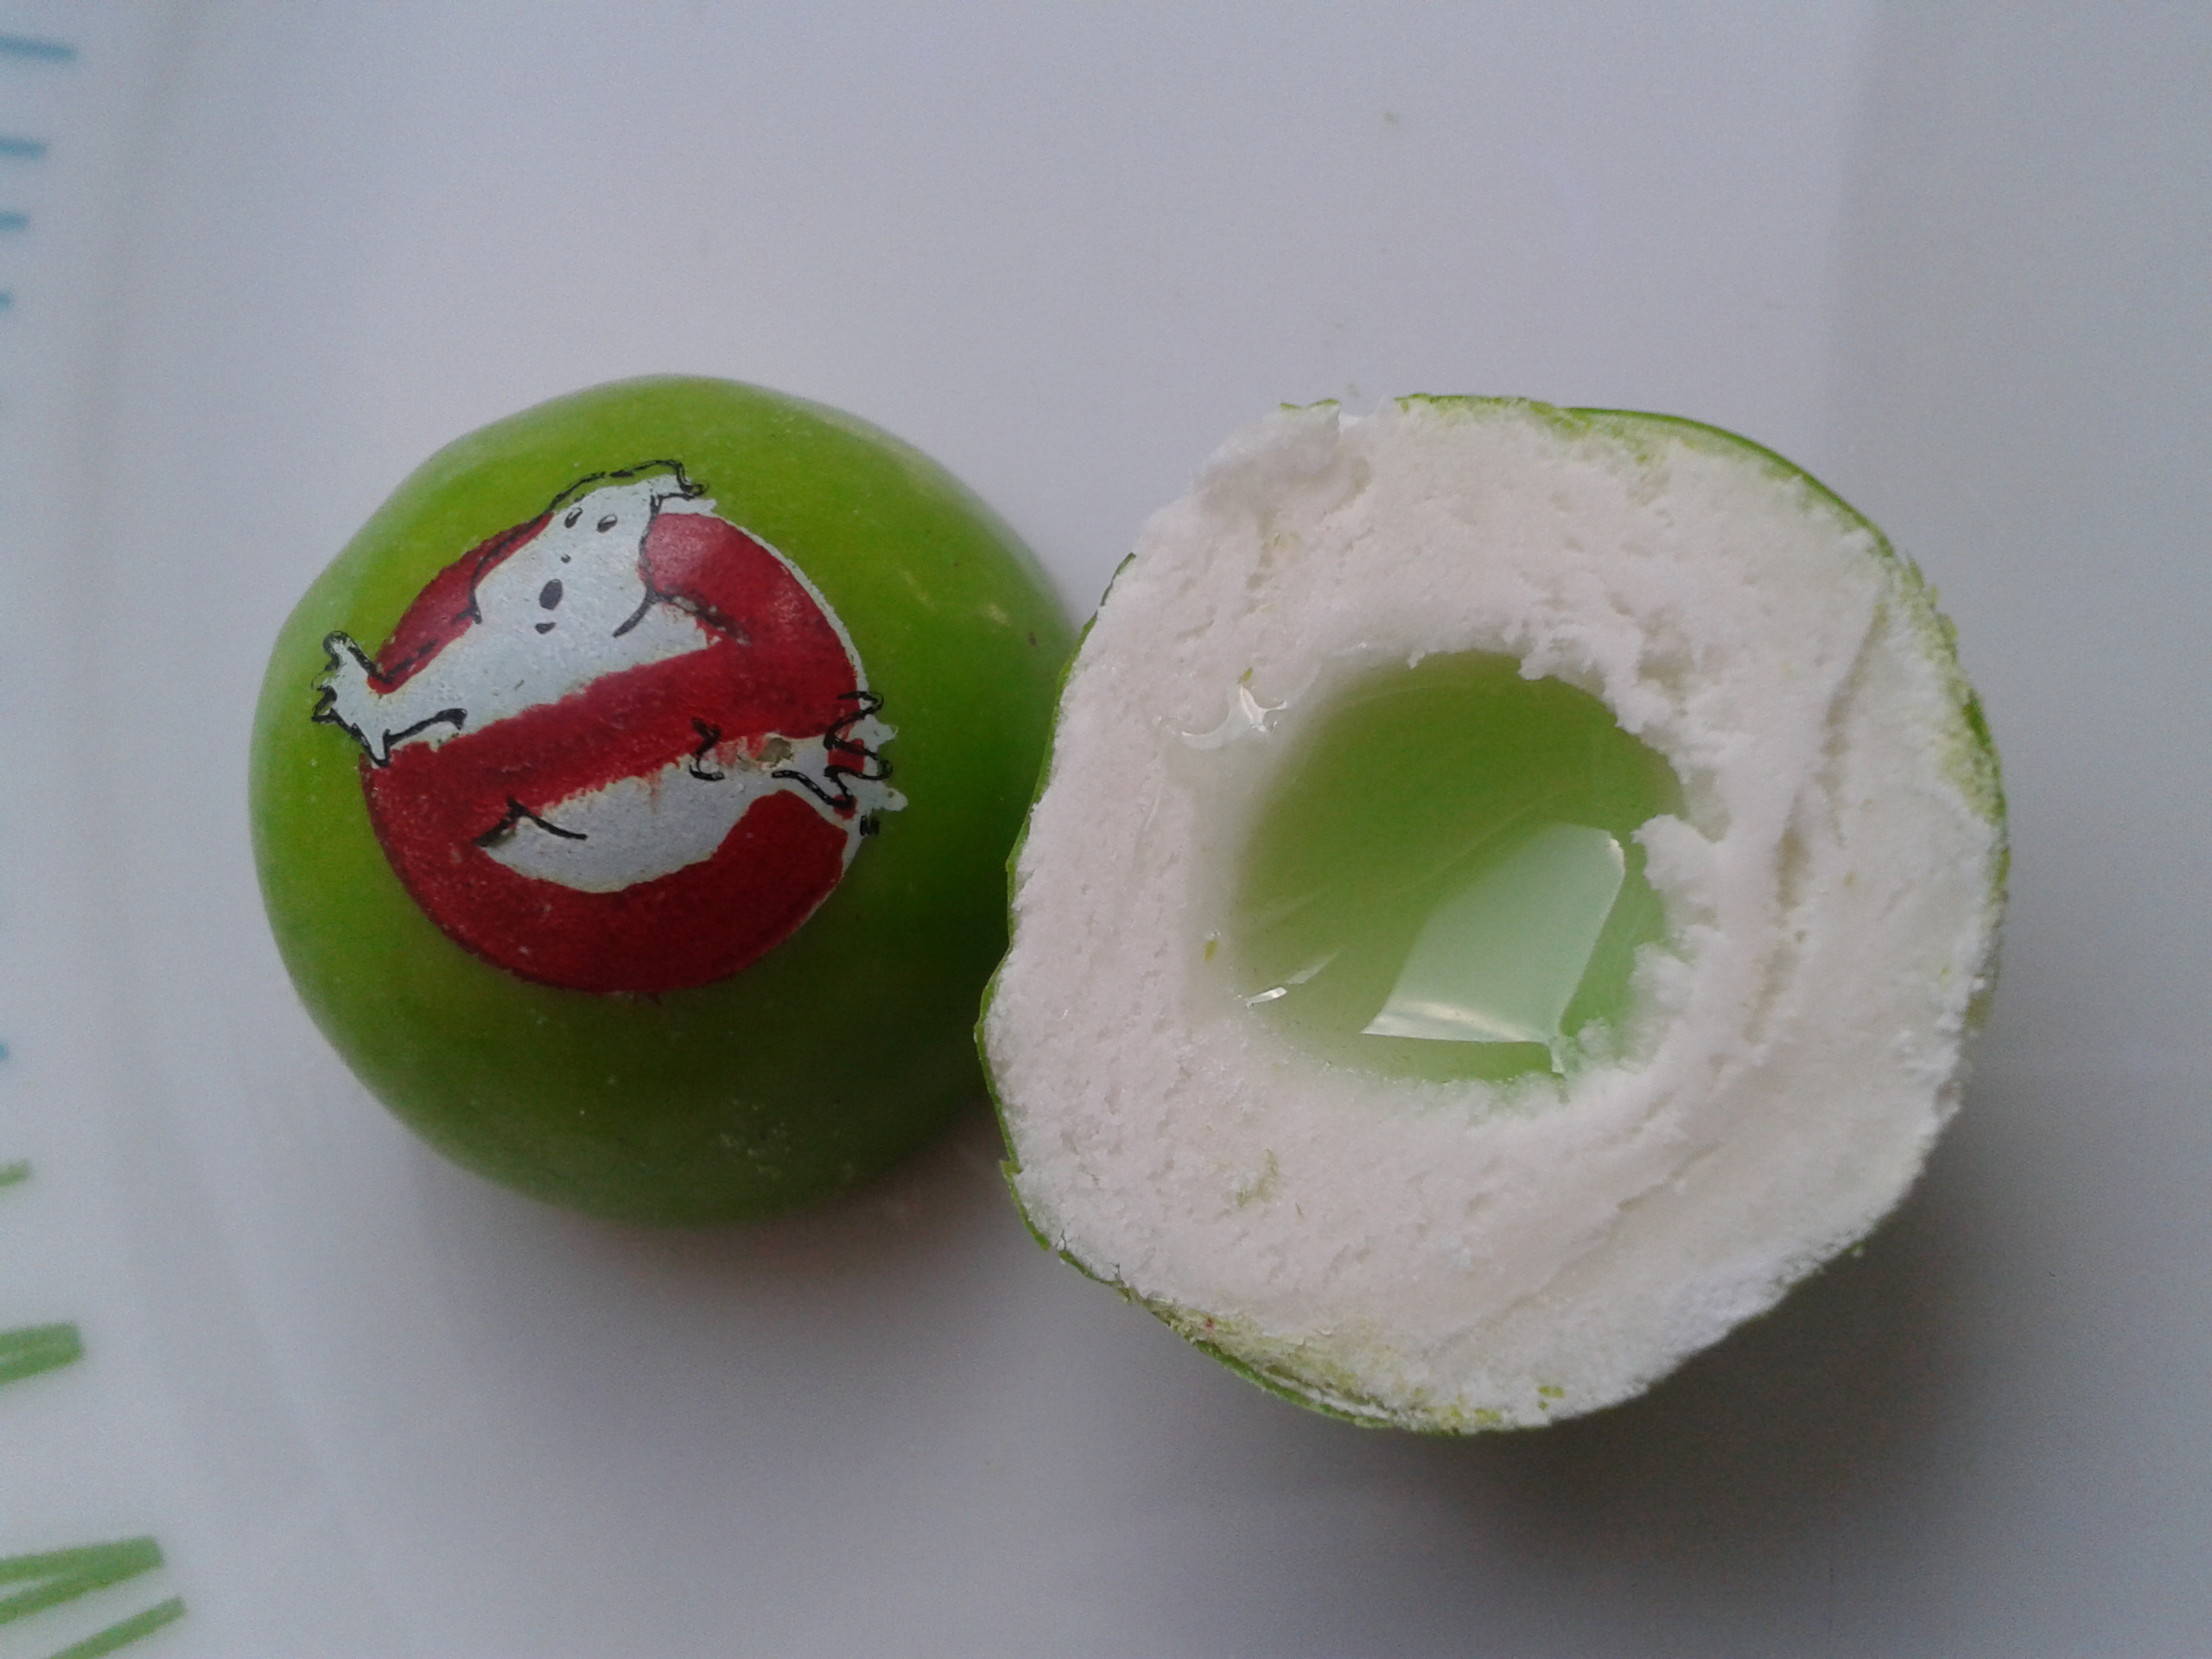 Ghostbusters Slimerz Gumball Cut open